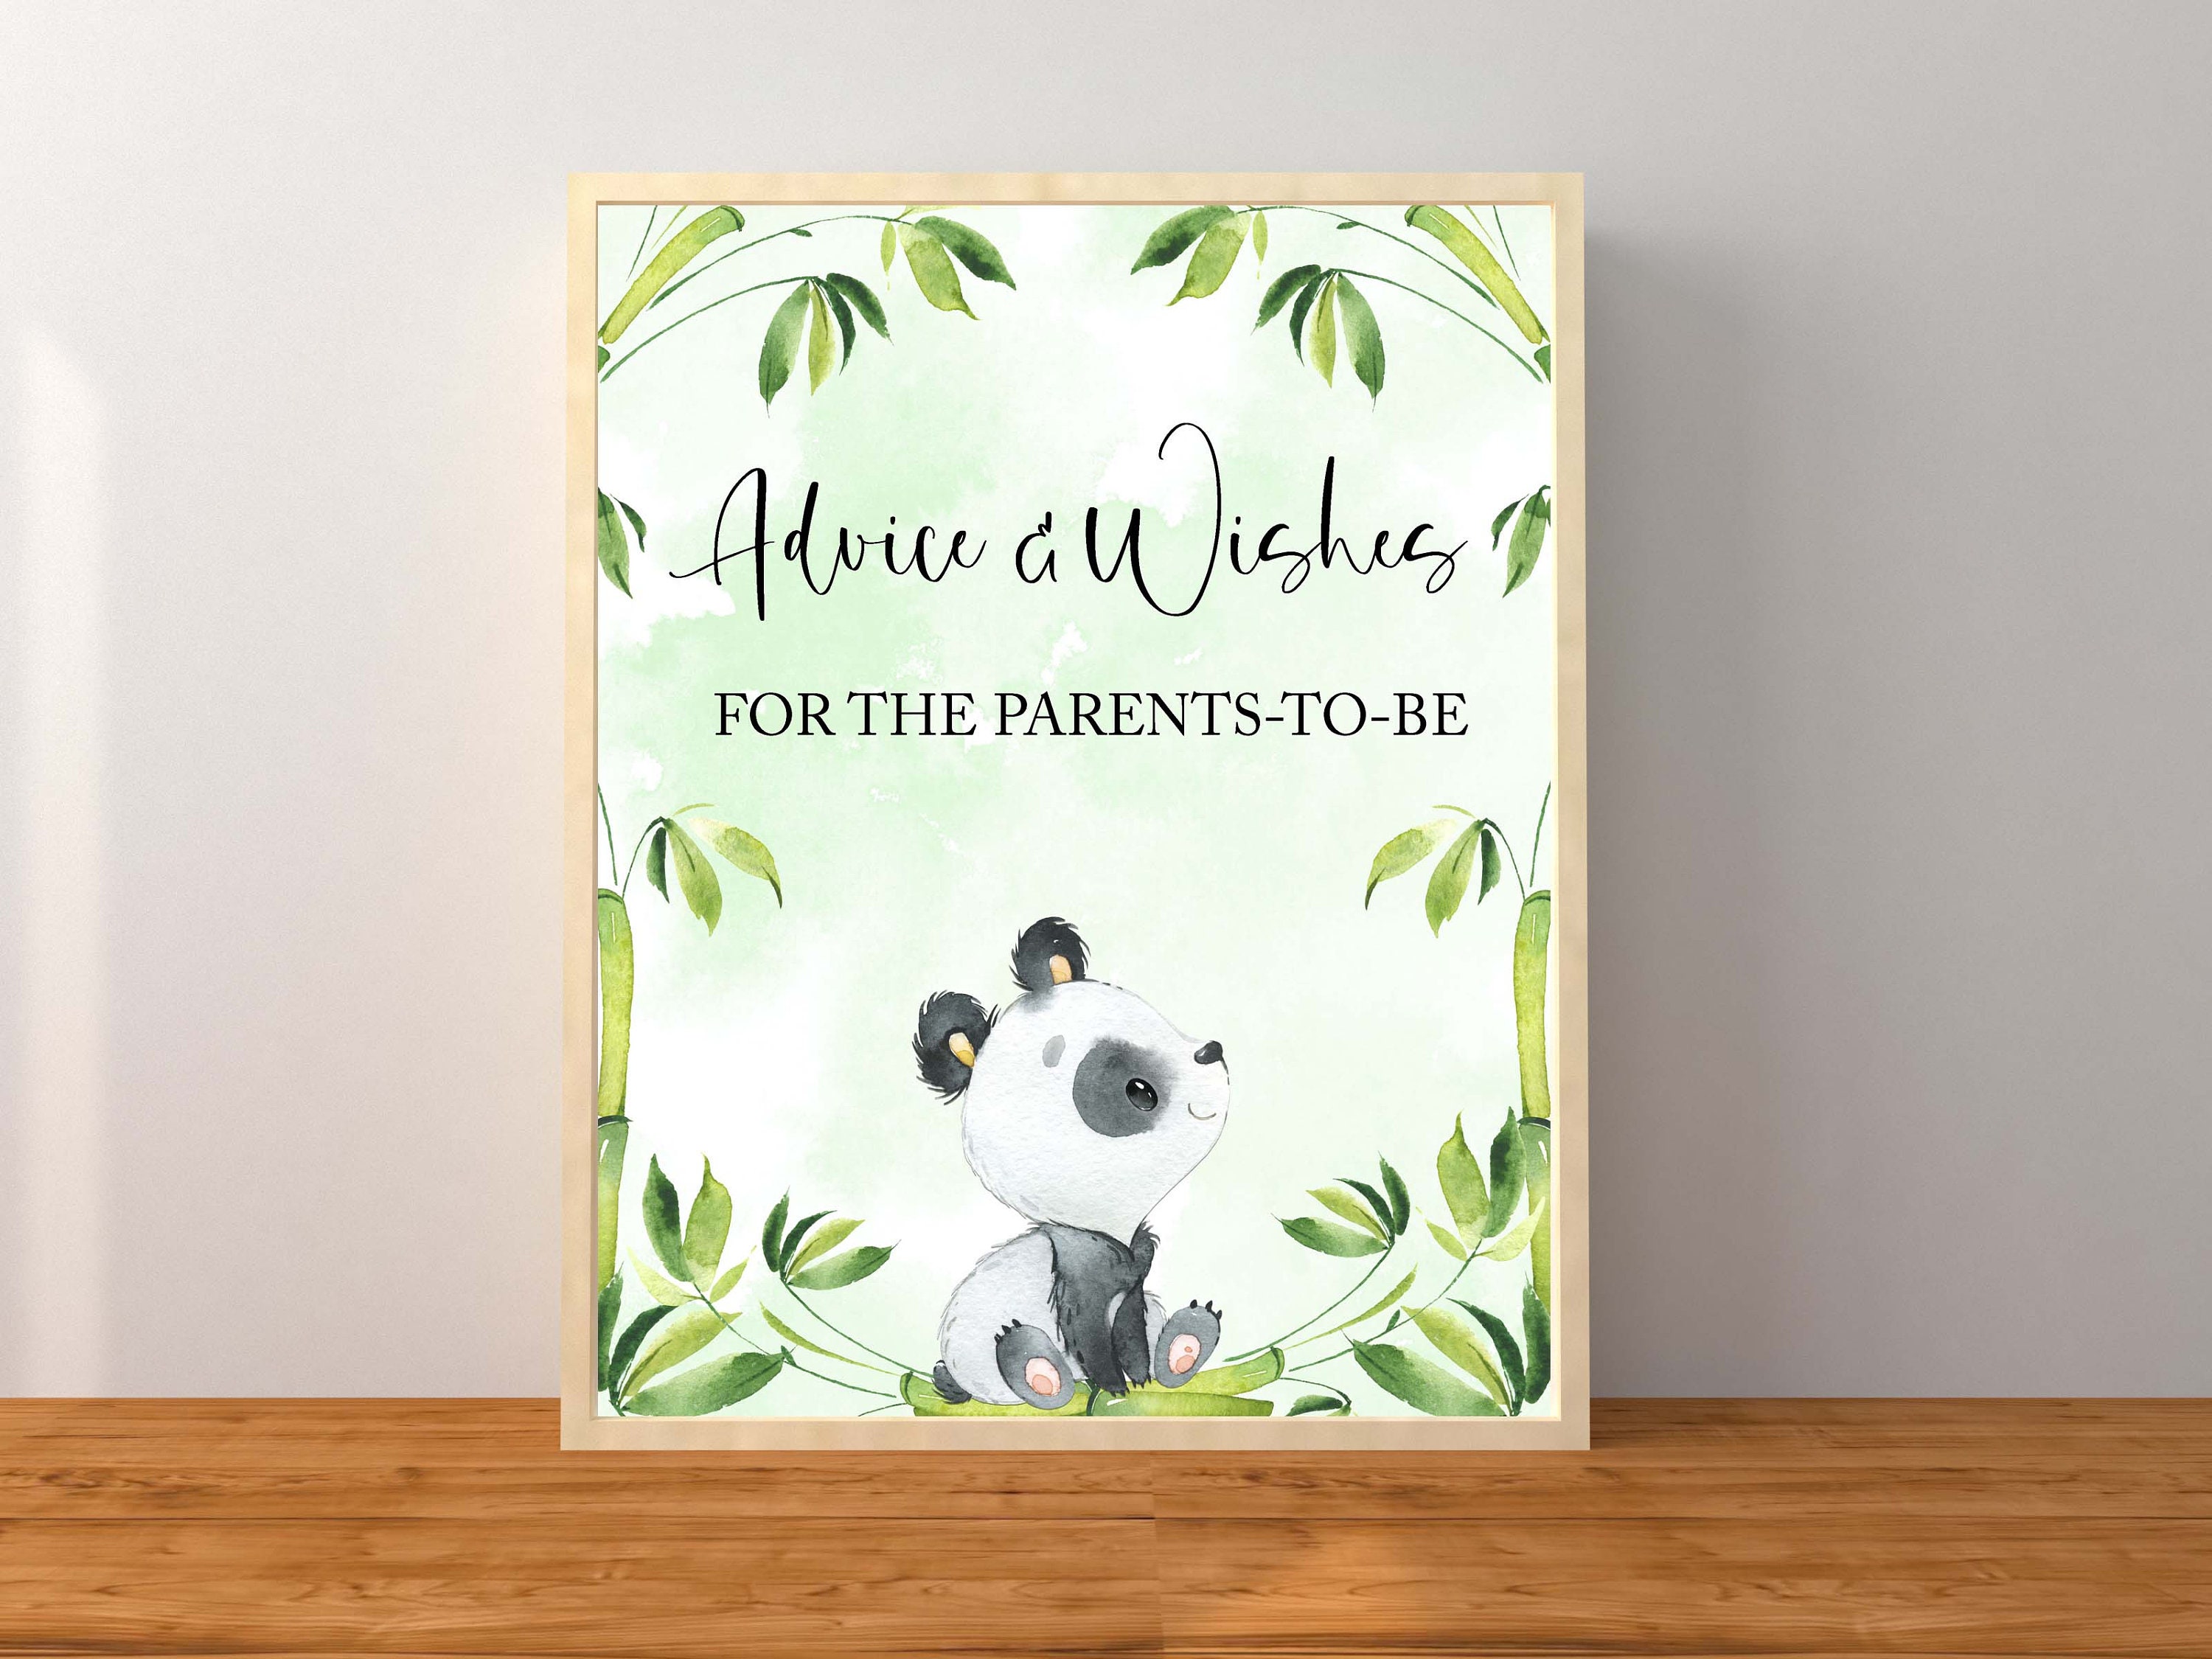 Wishes Shower Neutral Etsy - Panda for and Baby Download Printable Bear Baby, Advice for Instant Be, Wishes Gender Decorations, Parents to Panda